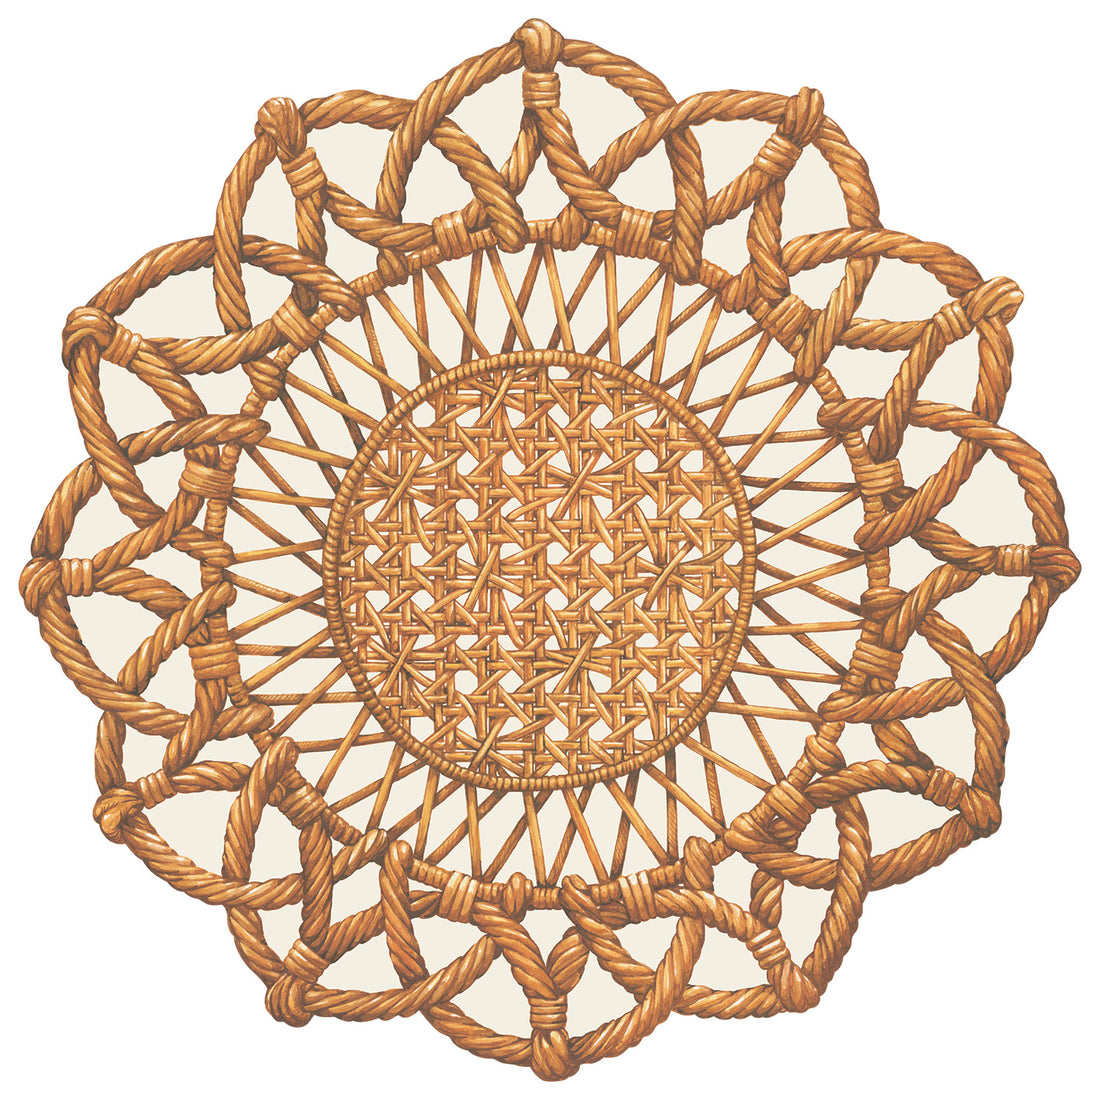 A round die-cut illustration of tan rattan woven in a radial design with a tight weave in the center, and thick interlocking ropes around the edge.